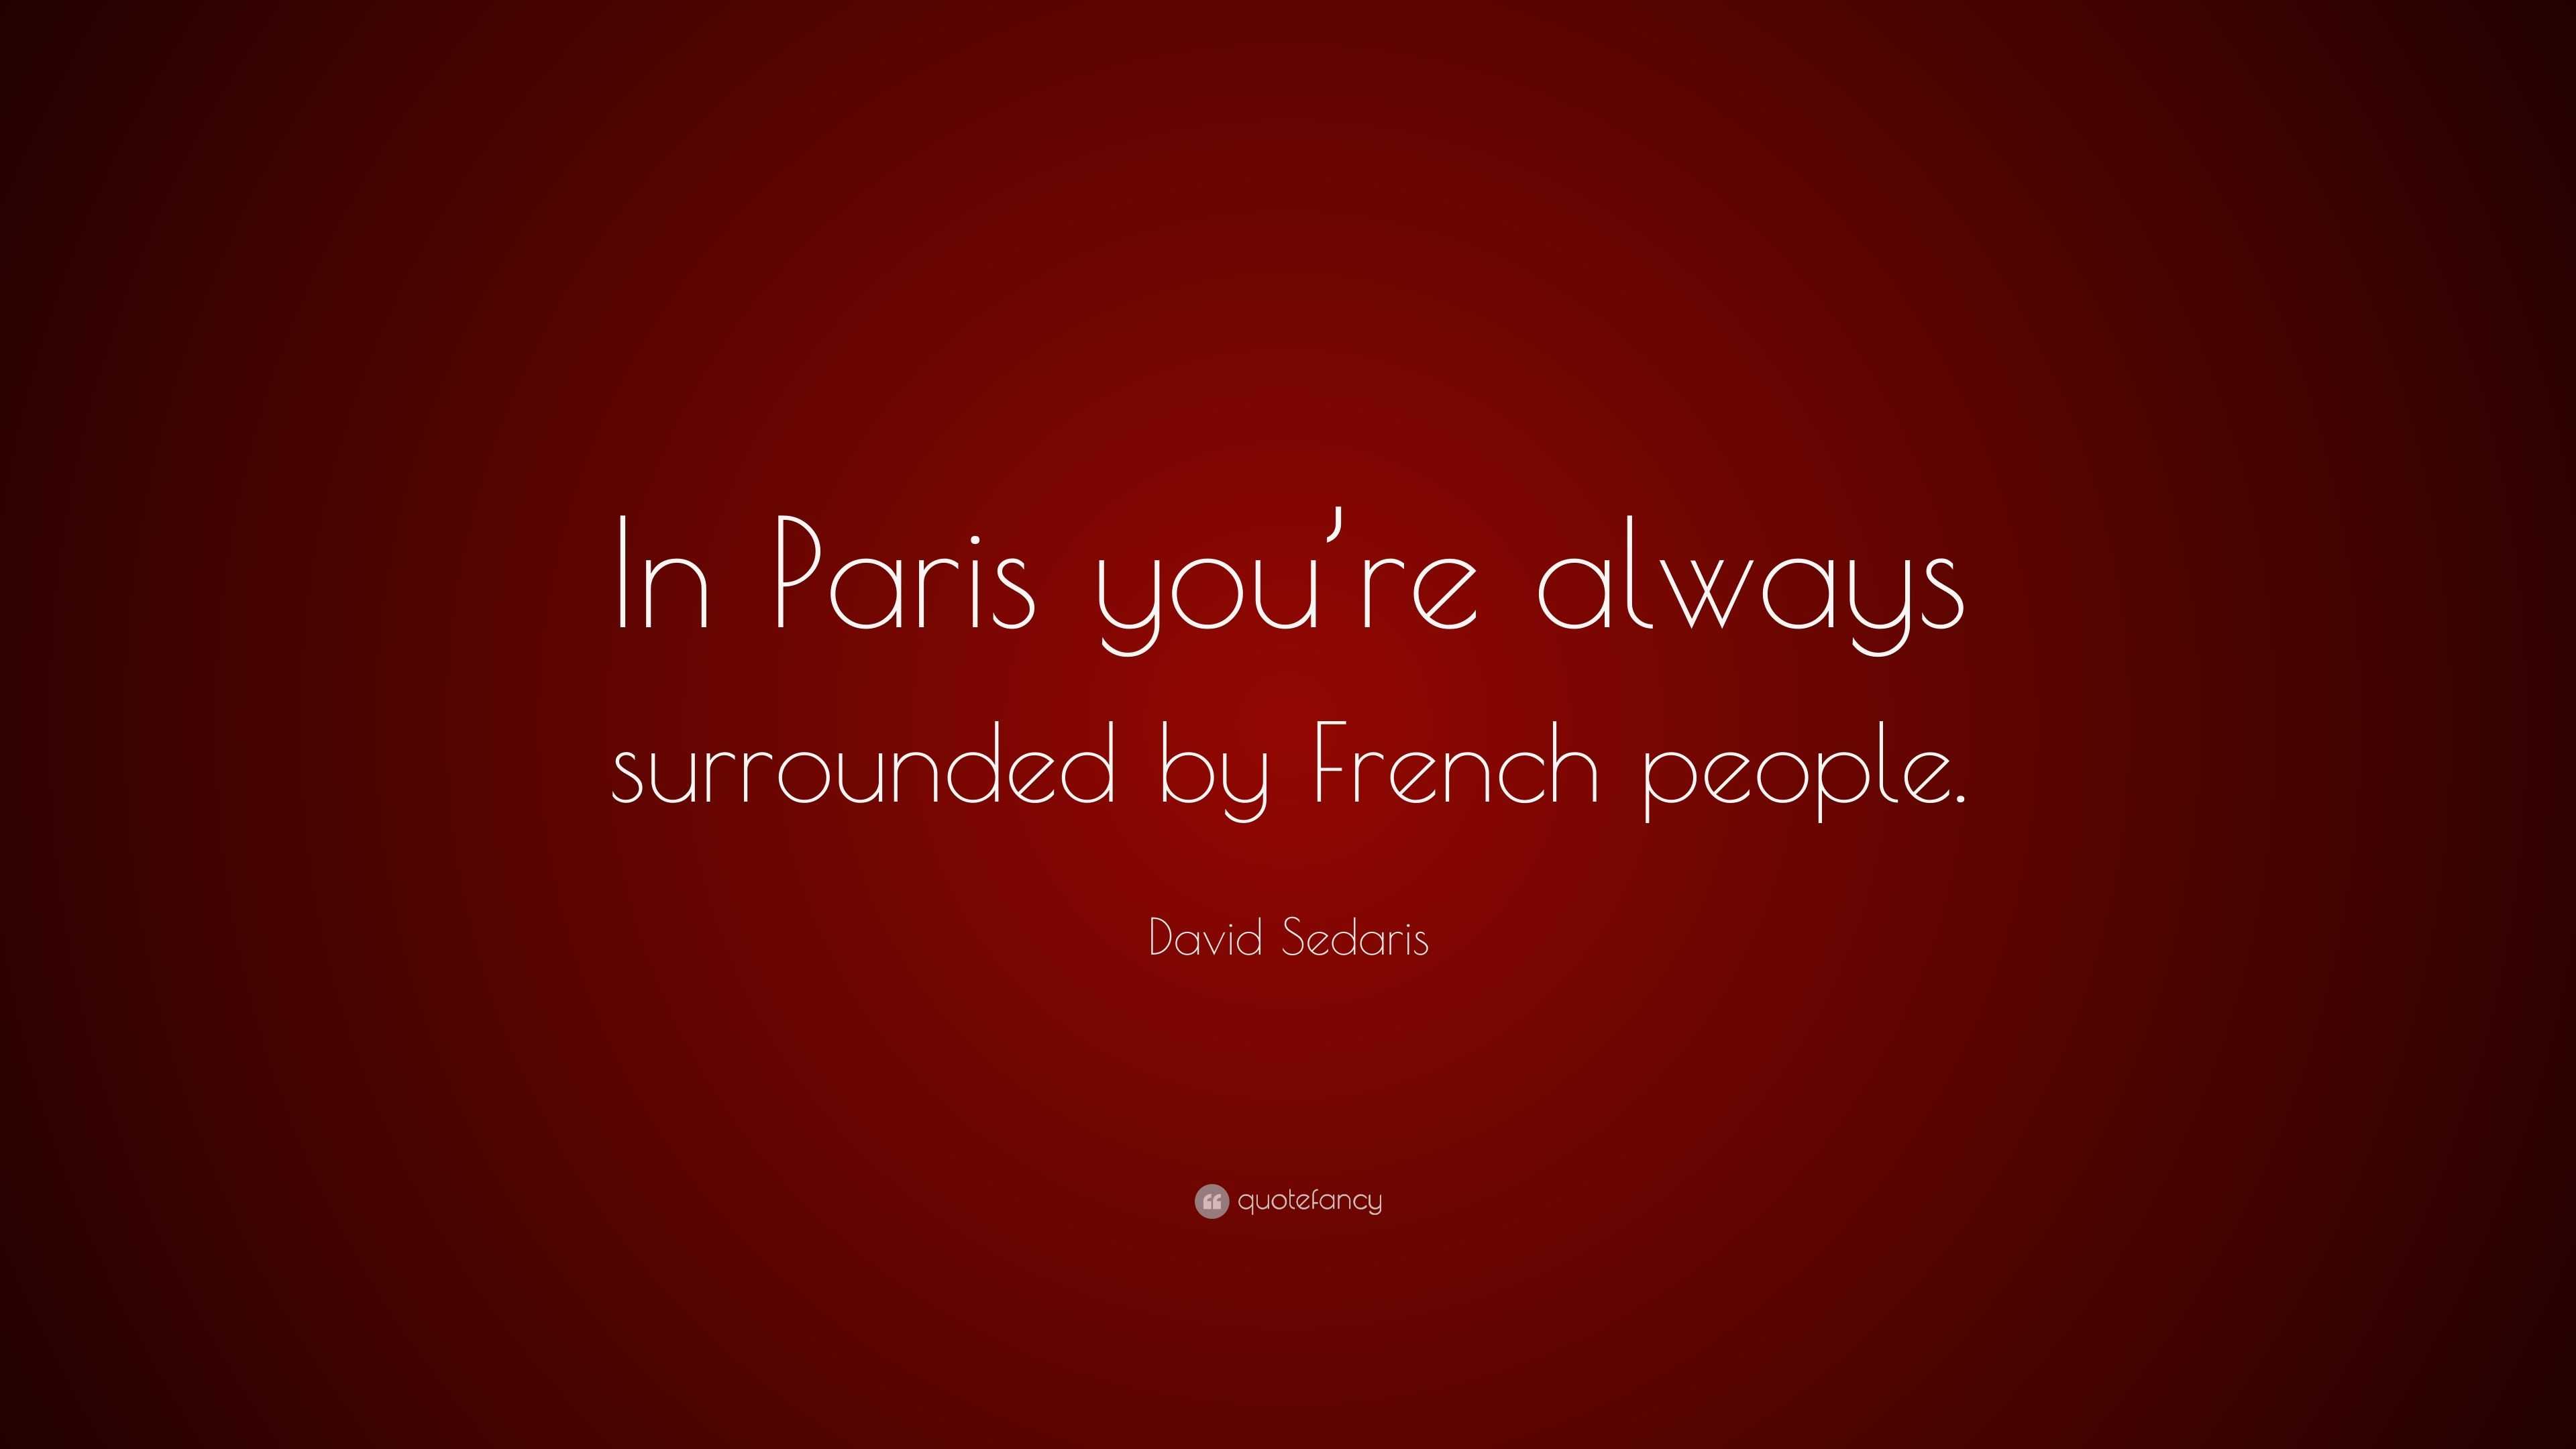 David Sedaris Quote: “In Paris you’re always surrounded by French people.”